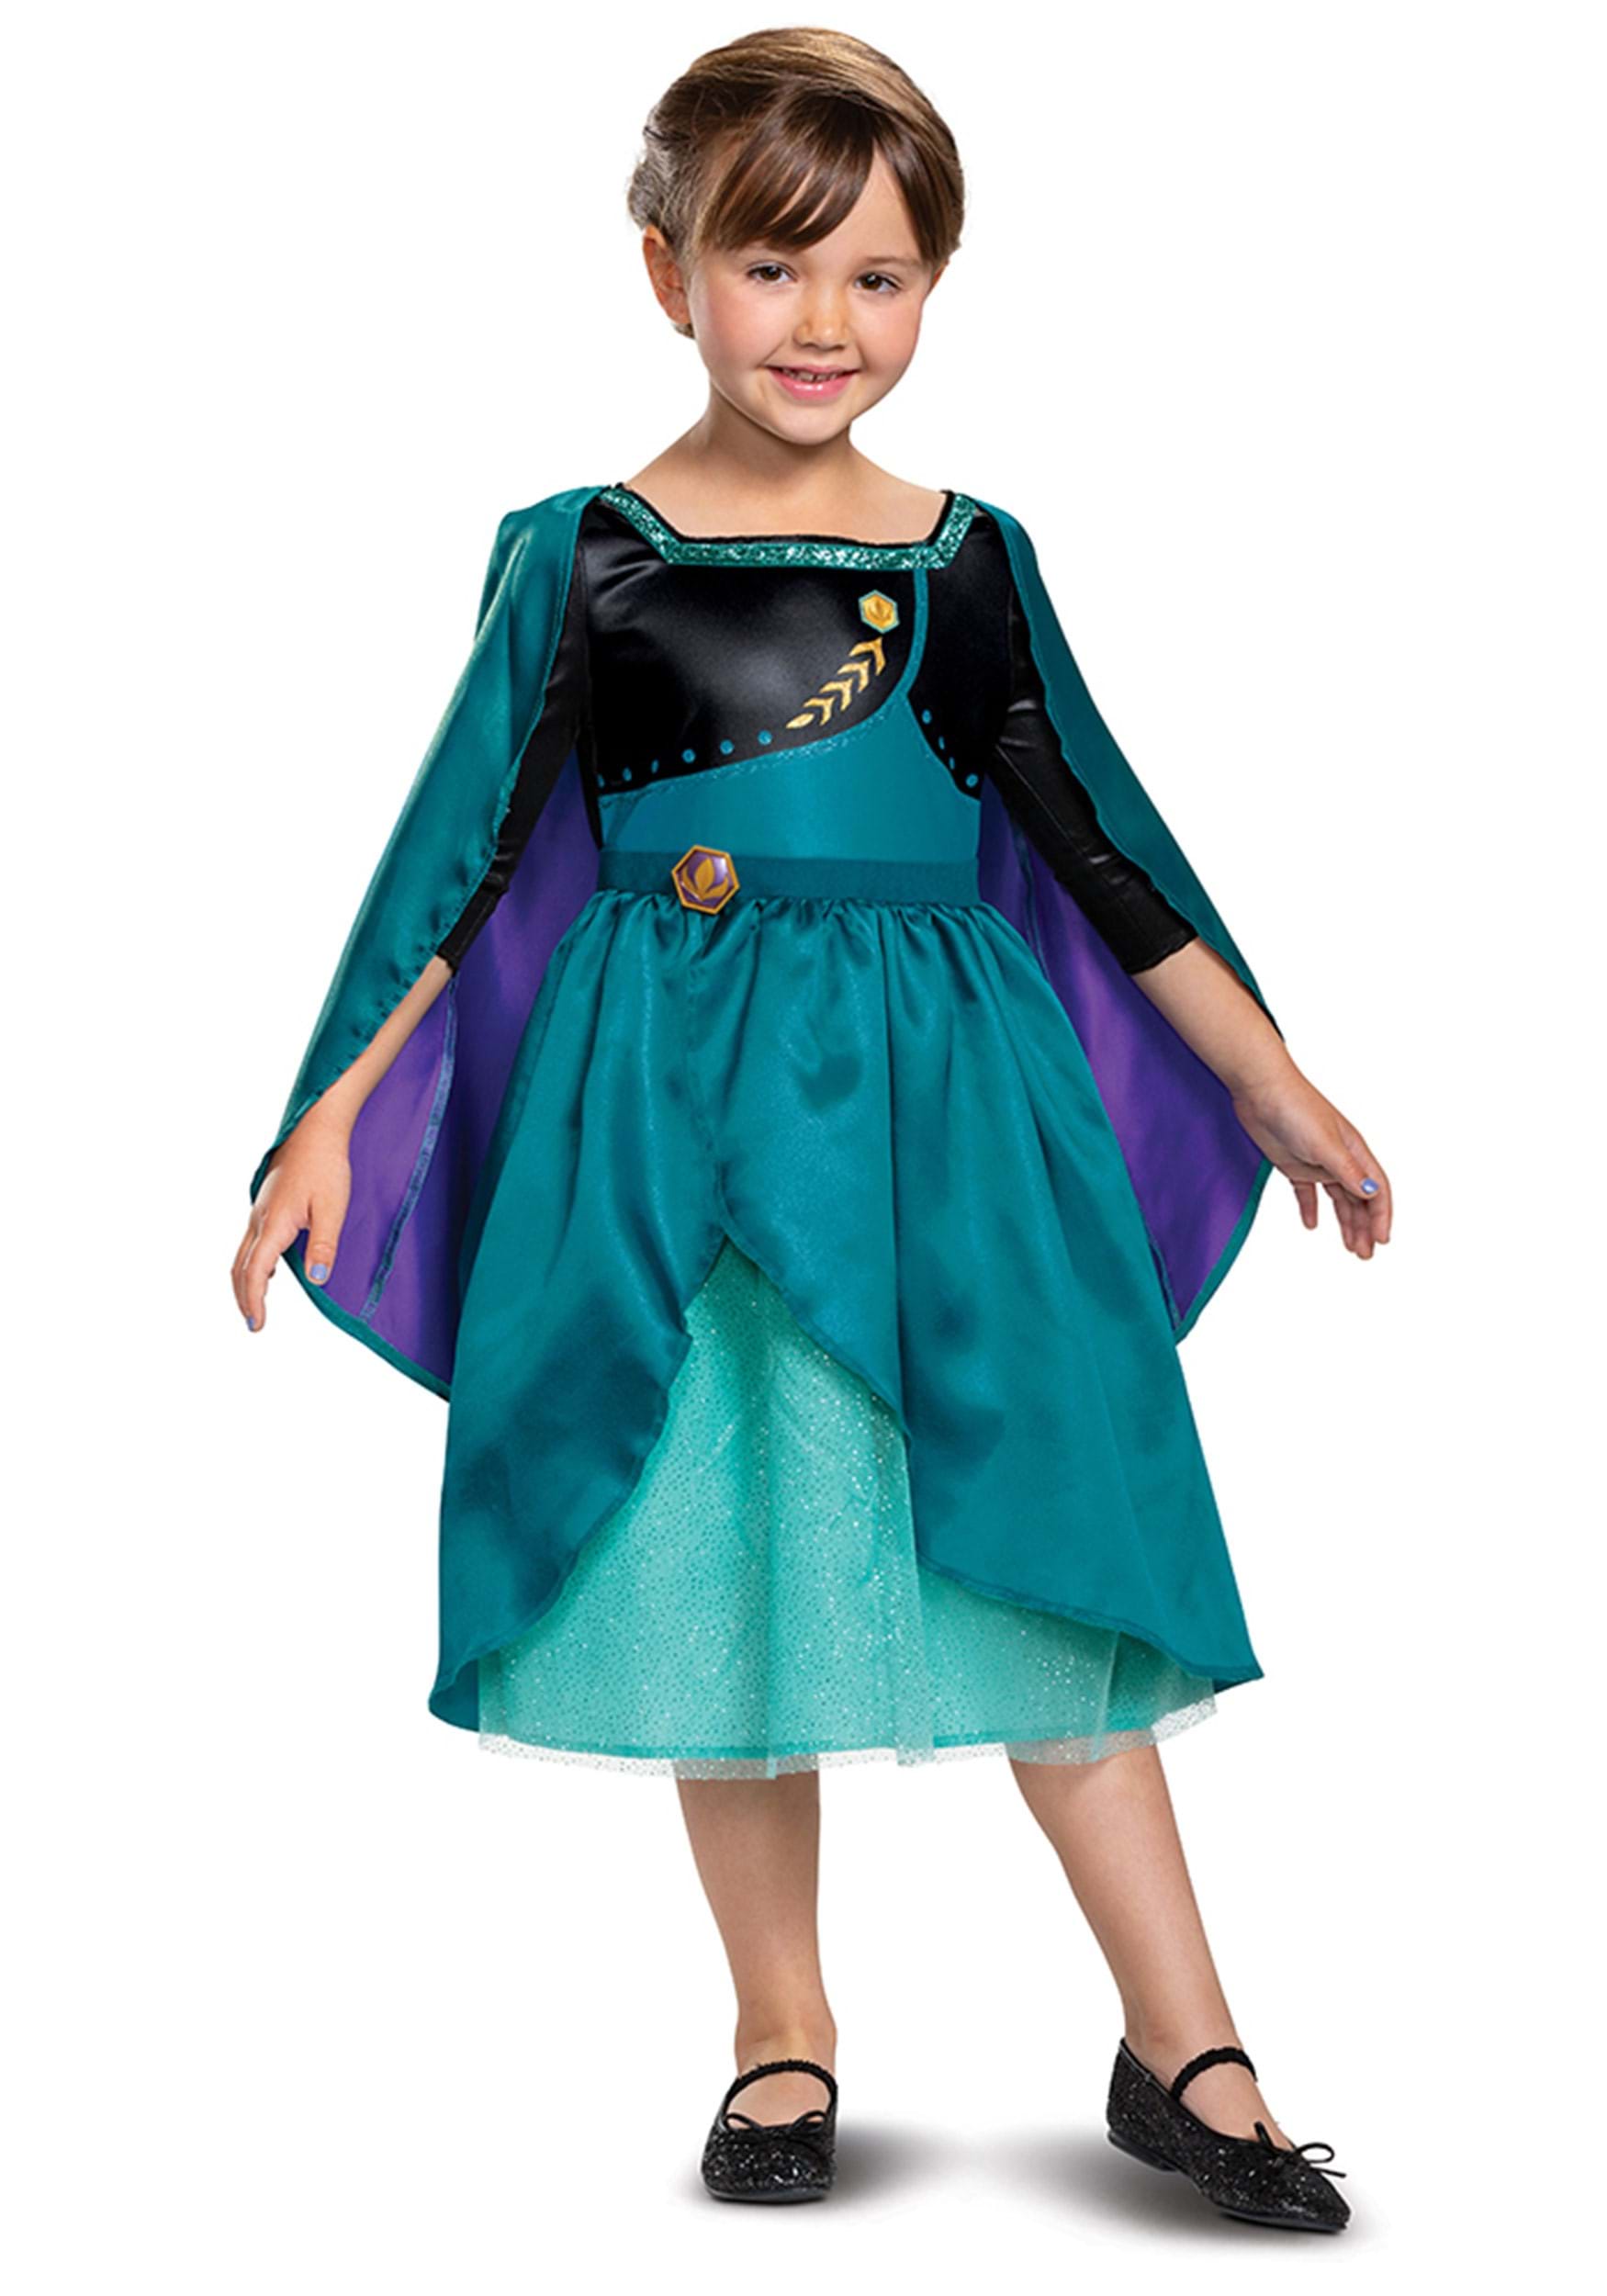 Buy PATPAT® Elsa Dress for Girls 3-4 Years Sequin Frozen Princess Elsa  Costumes for Girls Toddlers Fancy Dress Up with Wand, Gloves, Wig, Jewelry  Set for Birthday, Party, Cosplay - Size 110